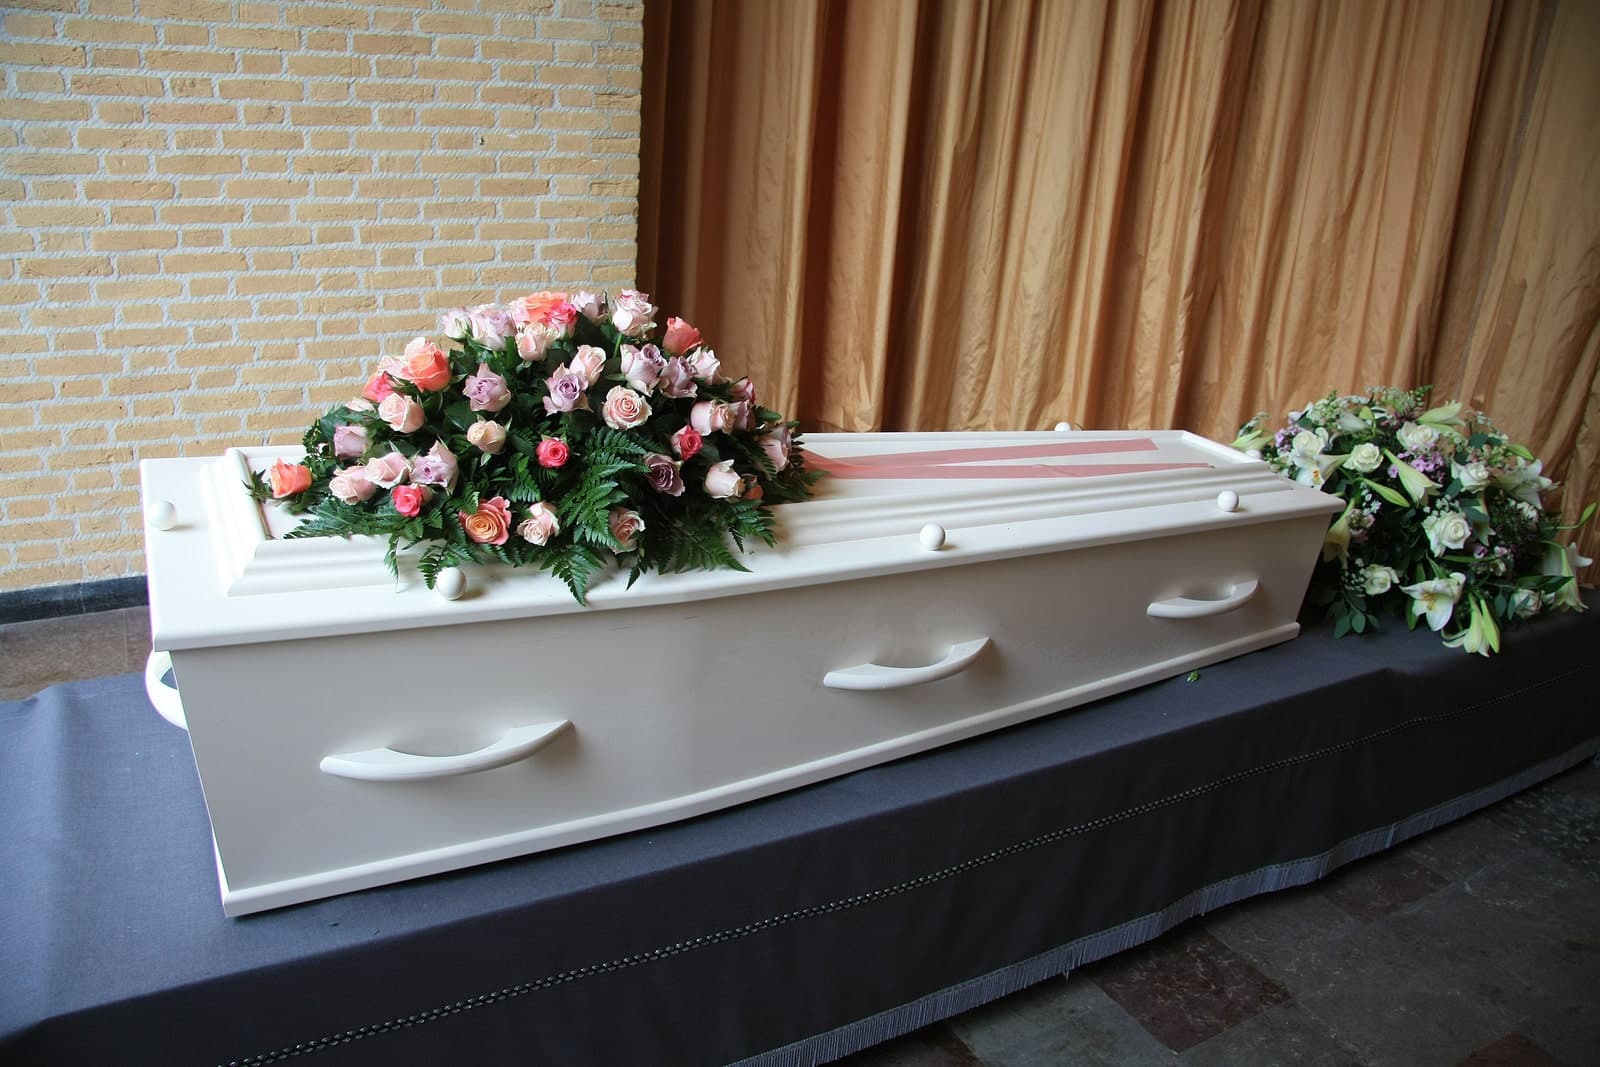 An image of a coffin with memorial flowers